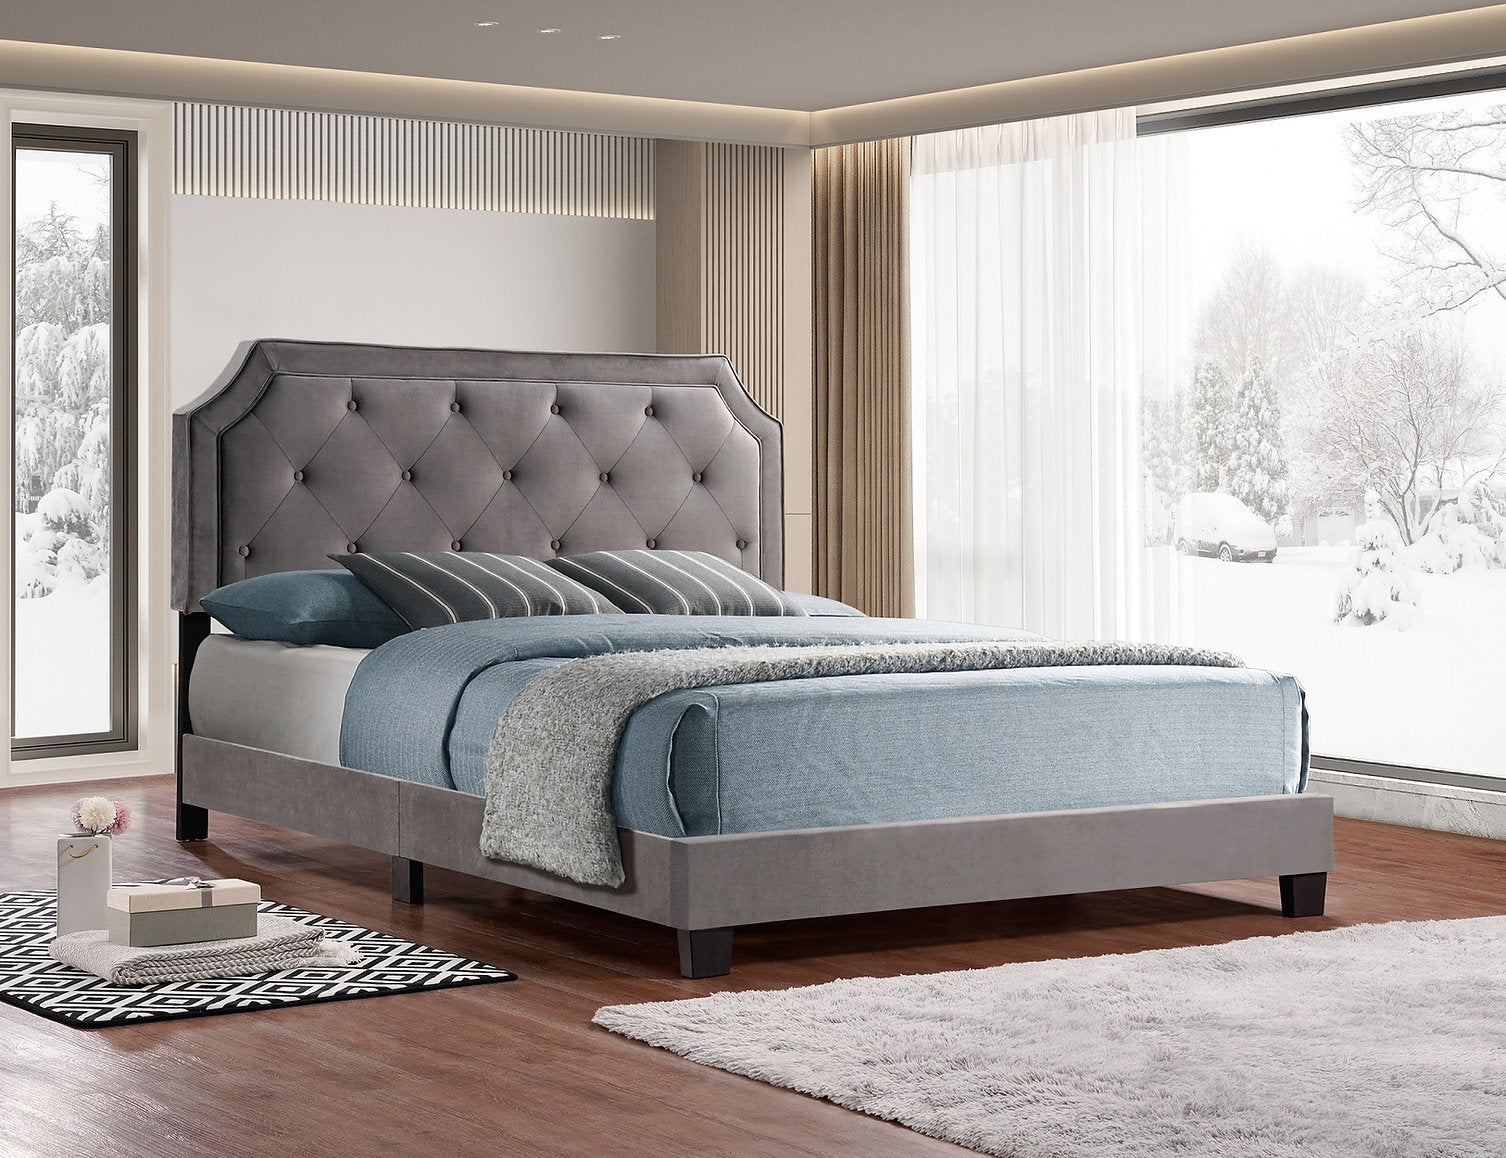 Bed - Grey Velvet with Diamond Pattern Tufting  IF-5610